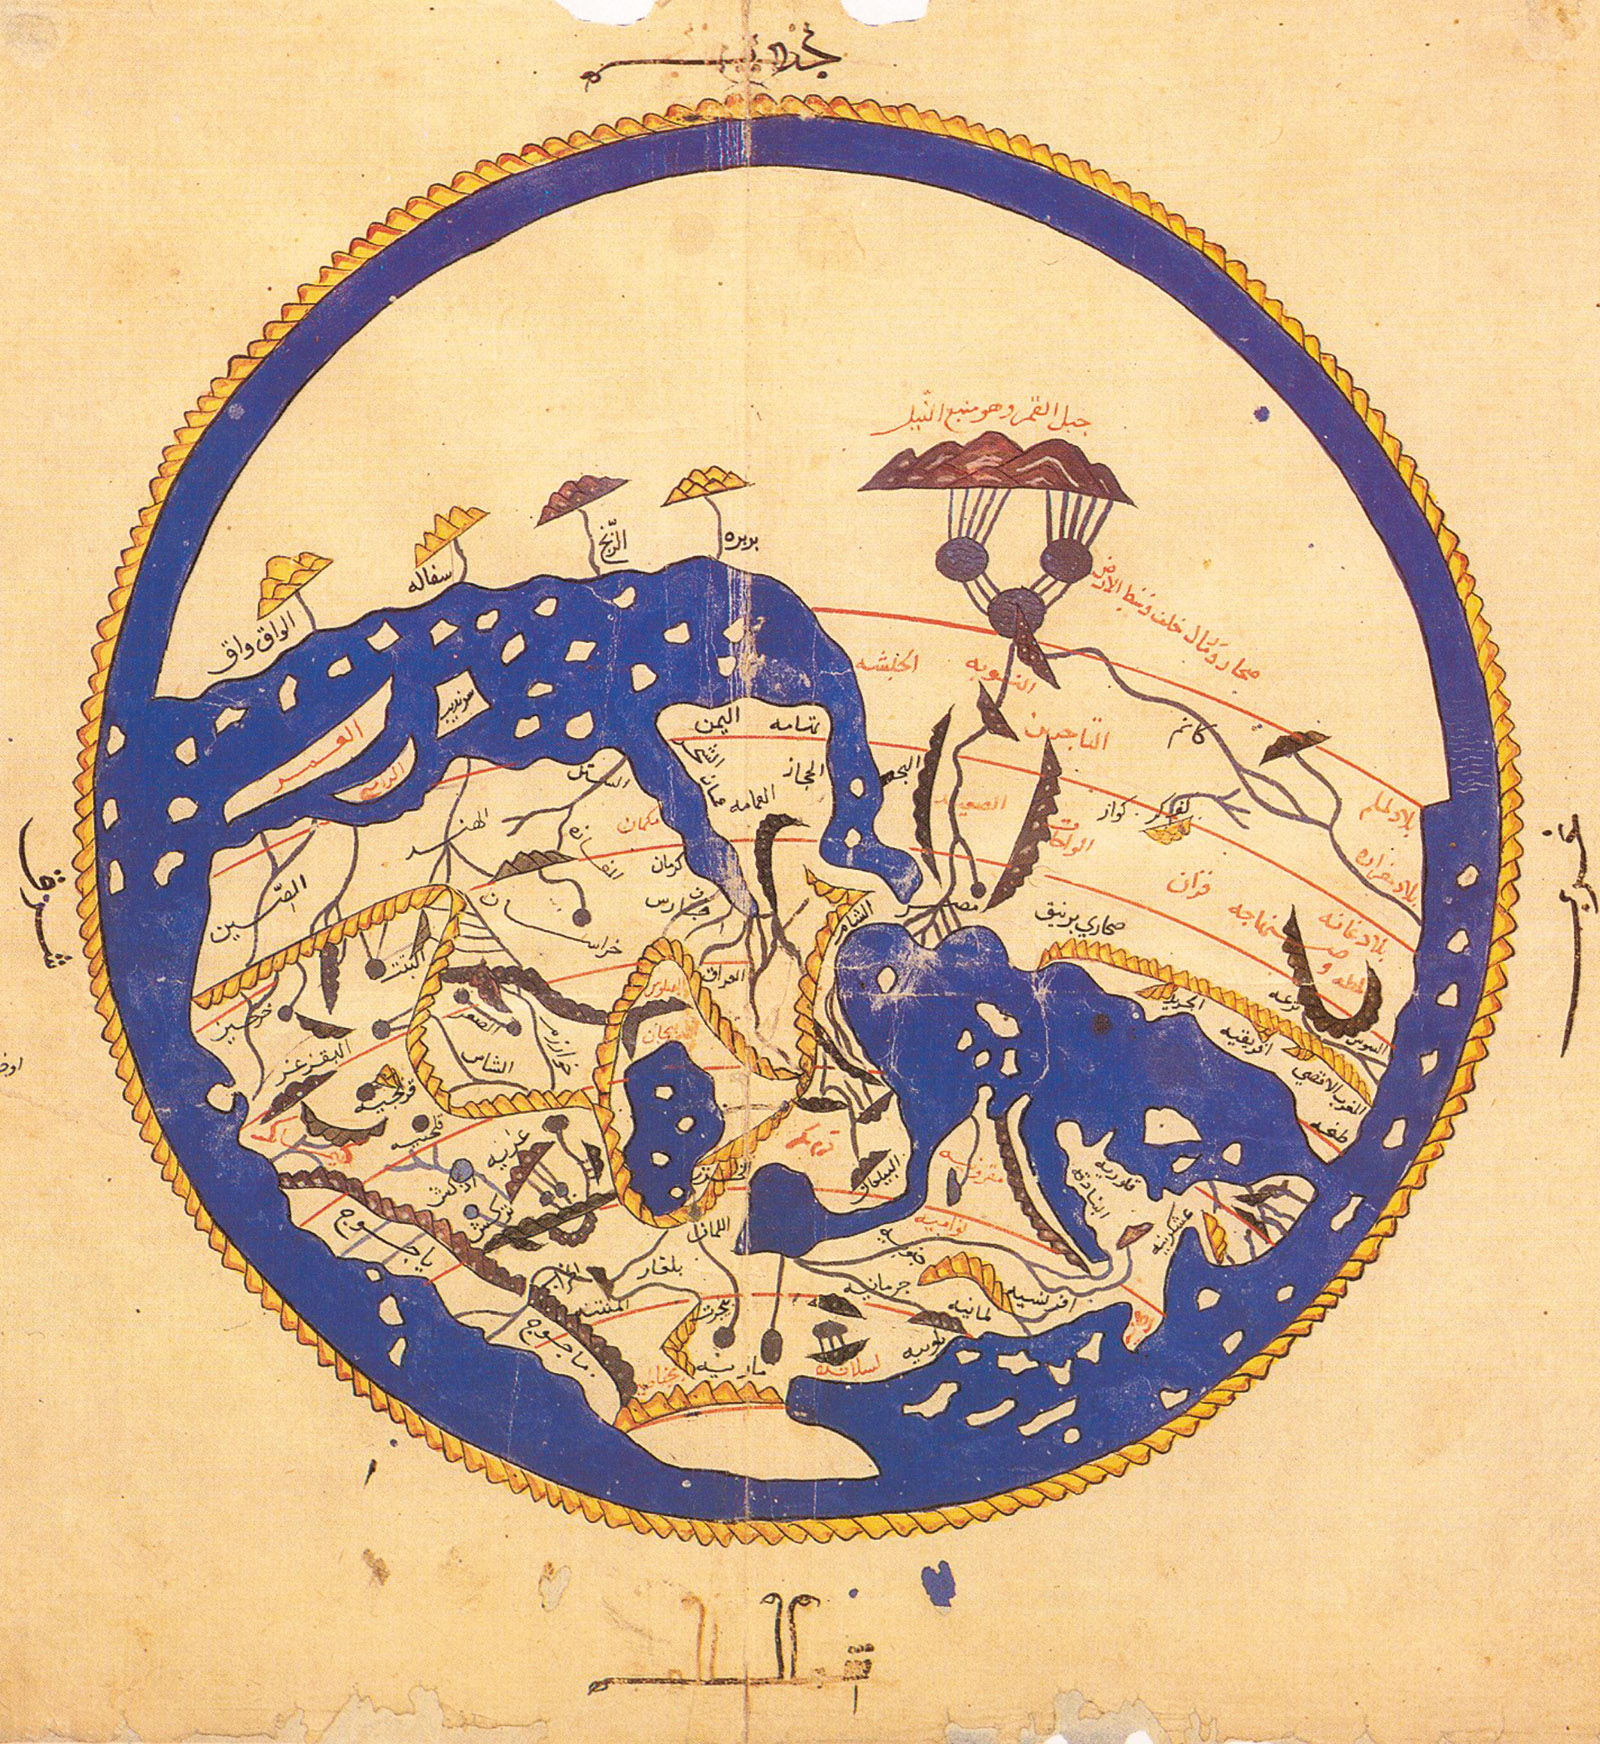 A map of the world from Entertainment for He Who Longs to Travel the World, a geographical book from 1154 by Muhammad al-Idrisi